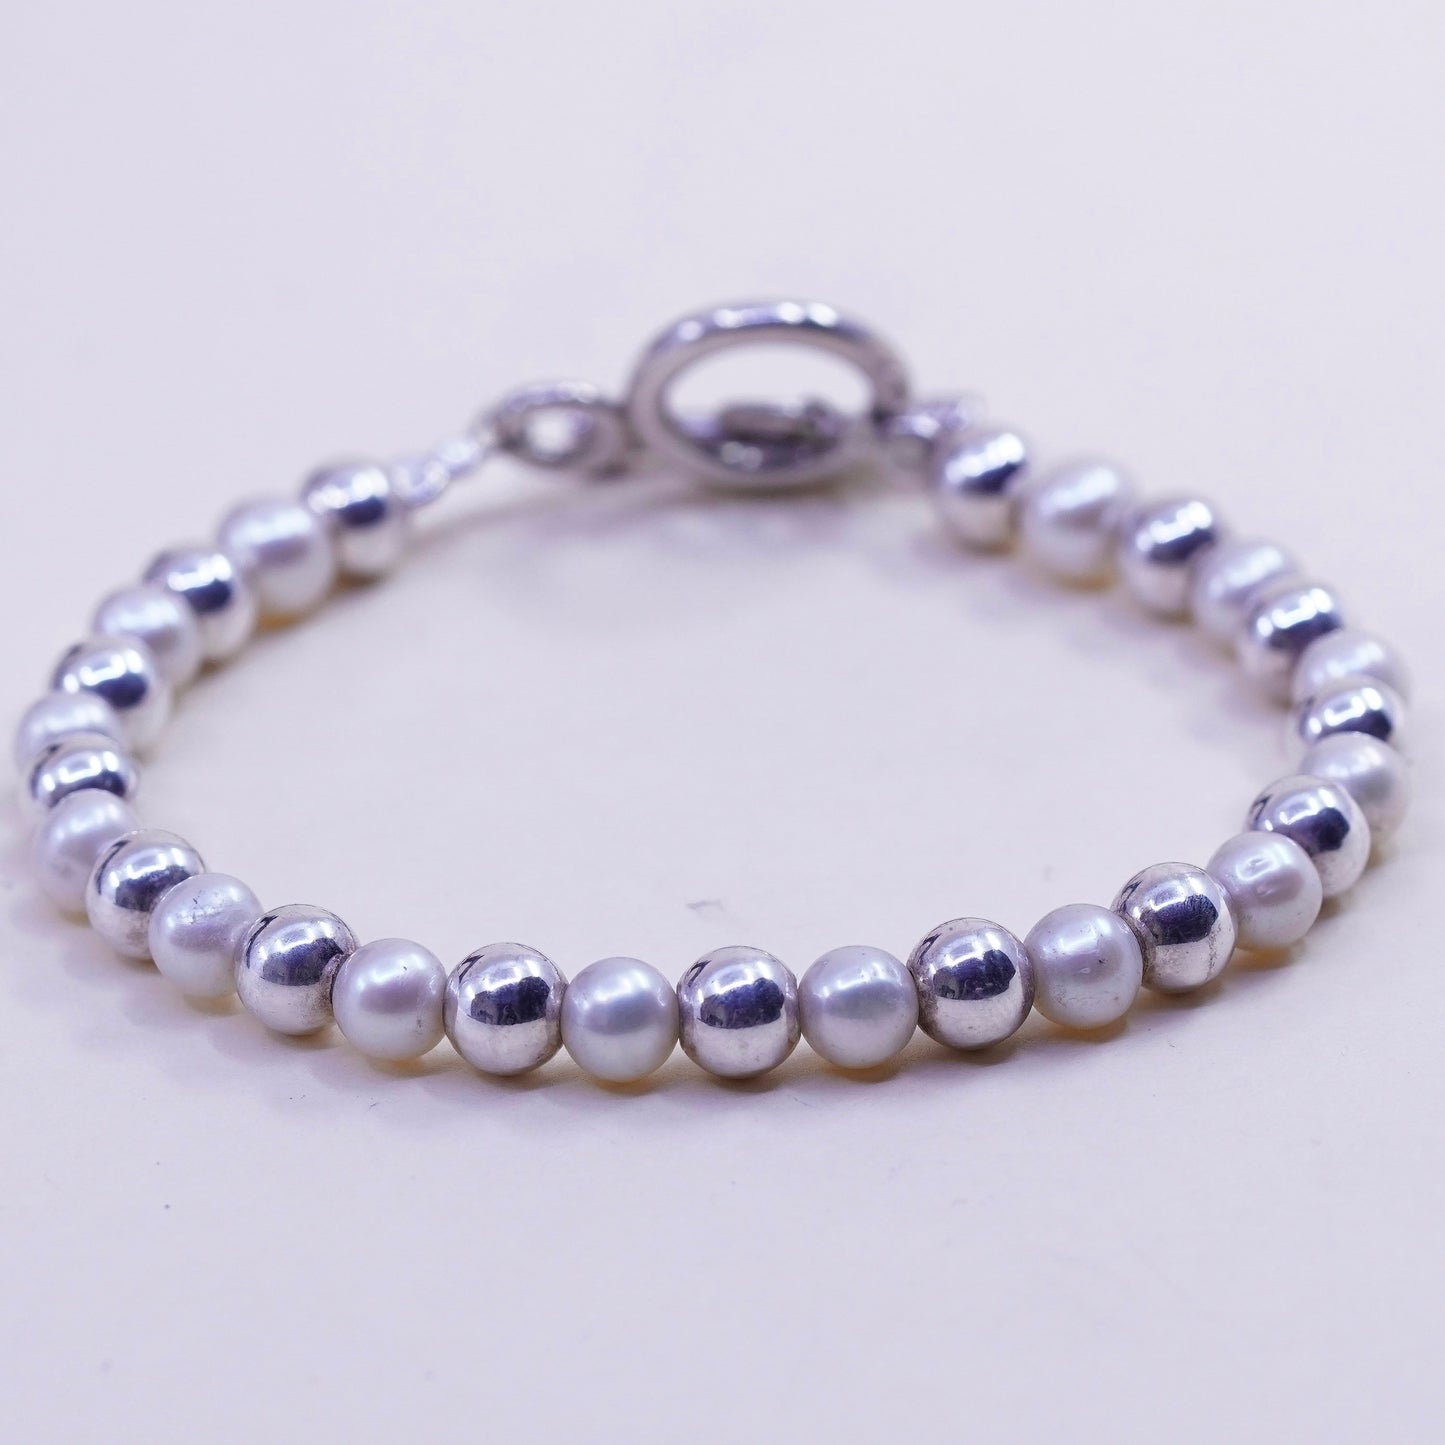 6.75”, Vintage handmade bracelet, pearl beads with 925 beads and toggle closure